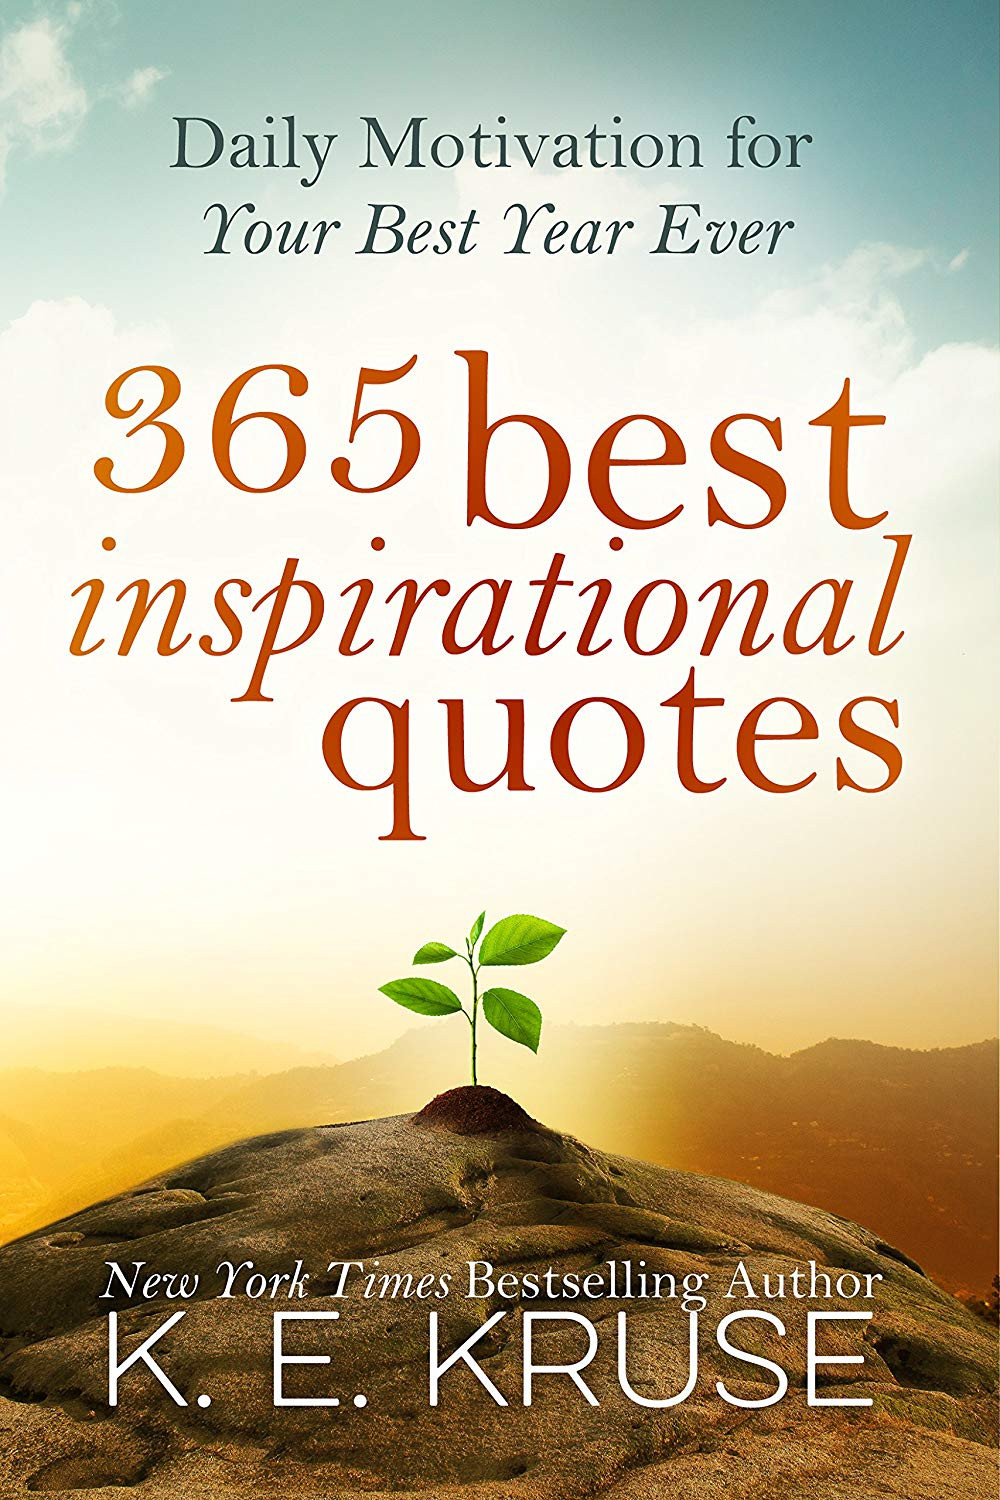 Daily Positive Quotes
 AMAZON KINDLE BOOK PROMOTION 365 Best Inspirational